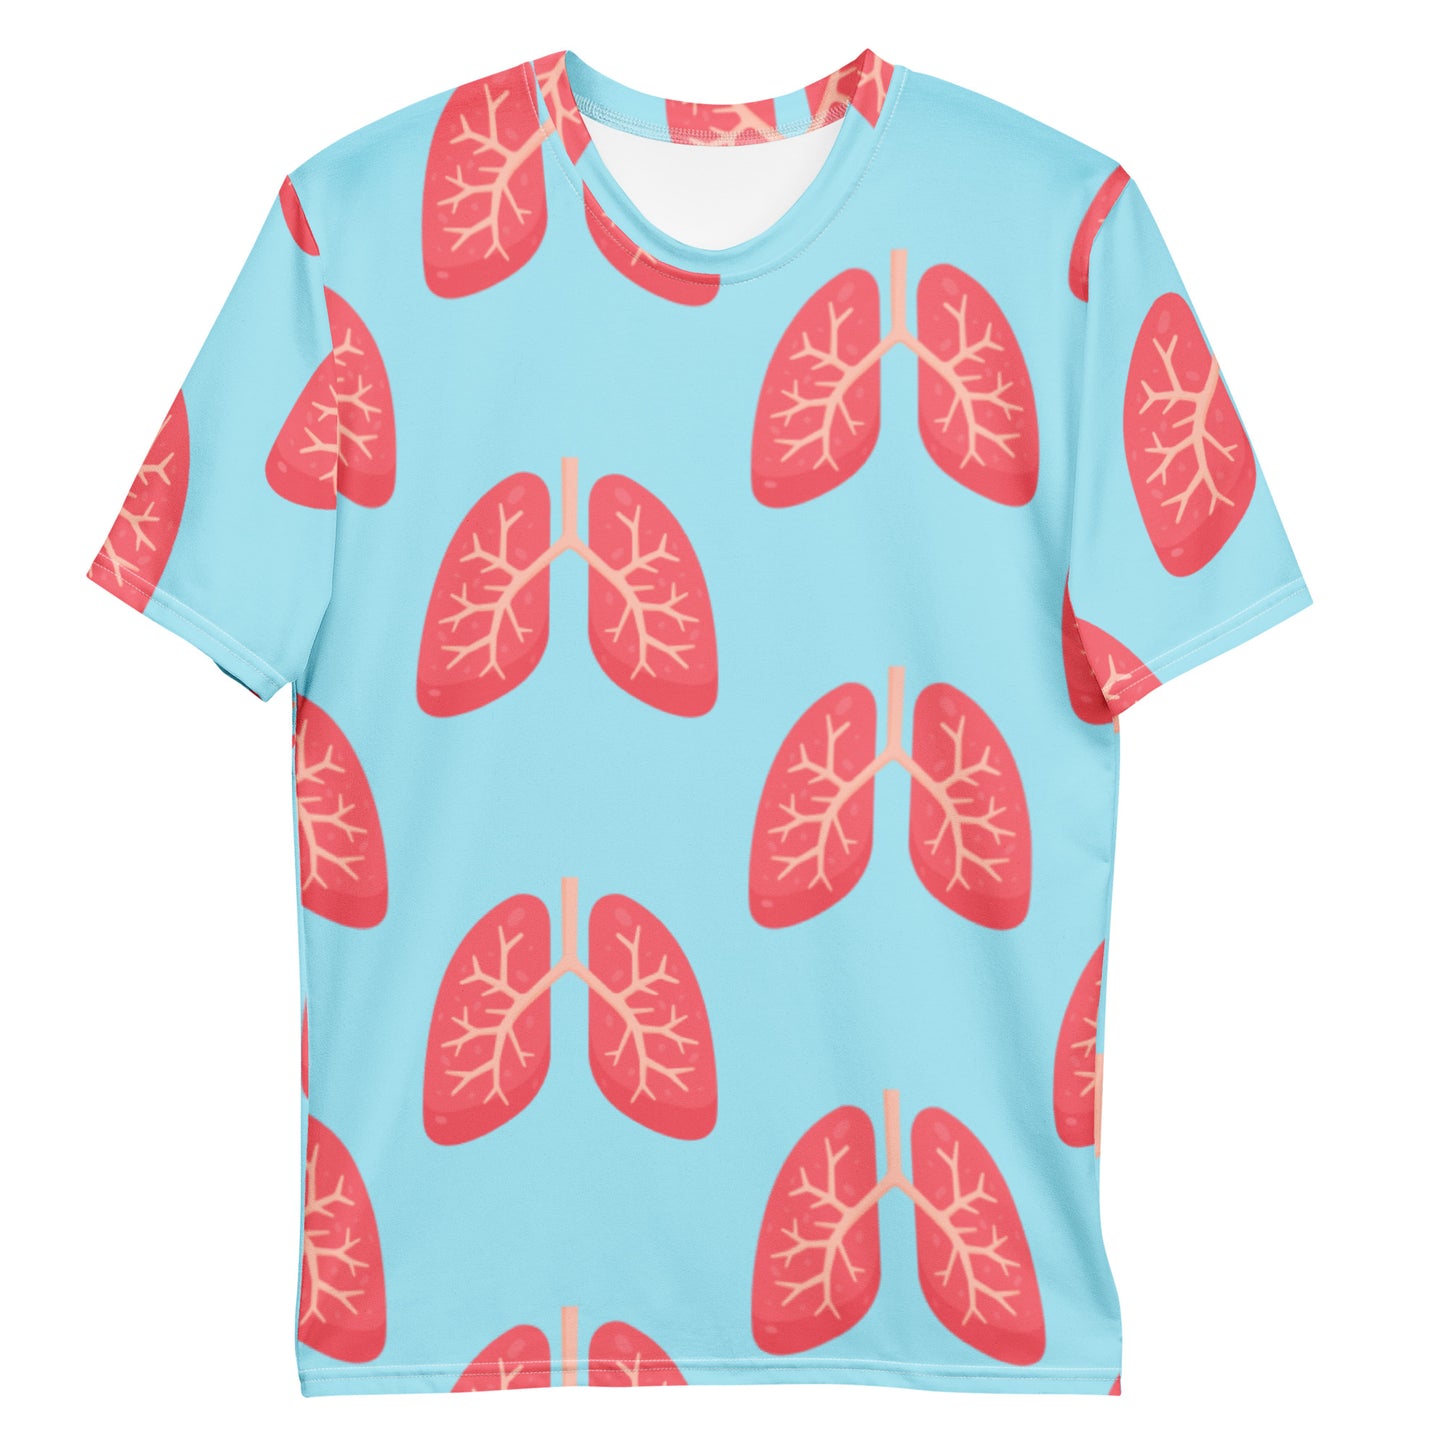 Men's All-Over Print Tee: Lungs